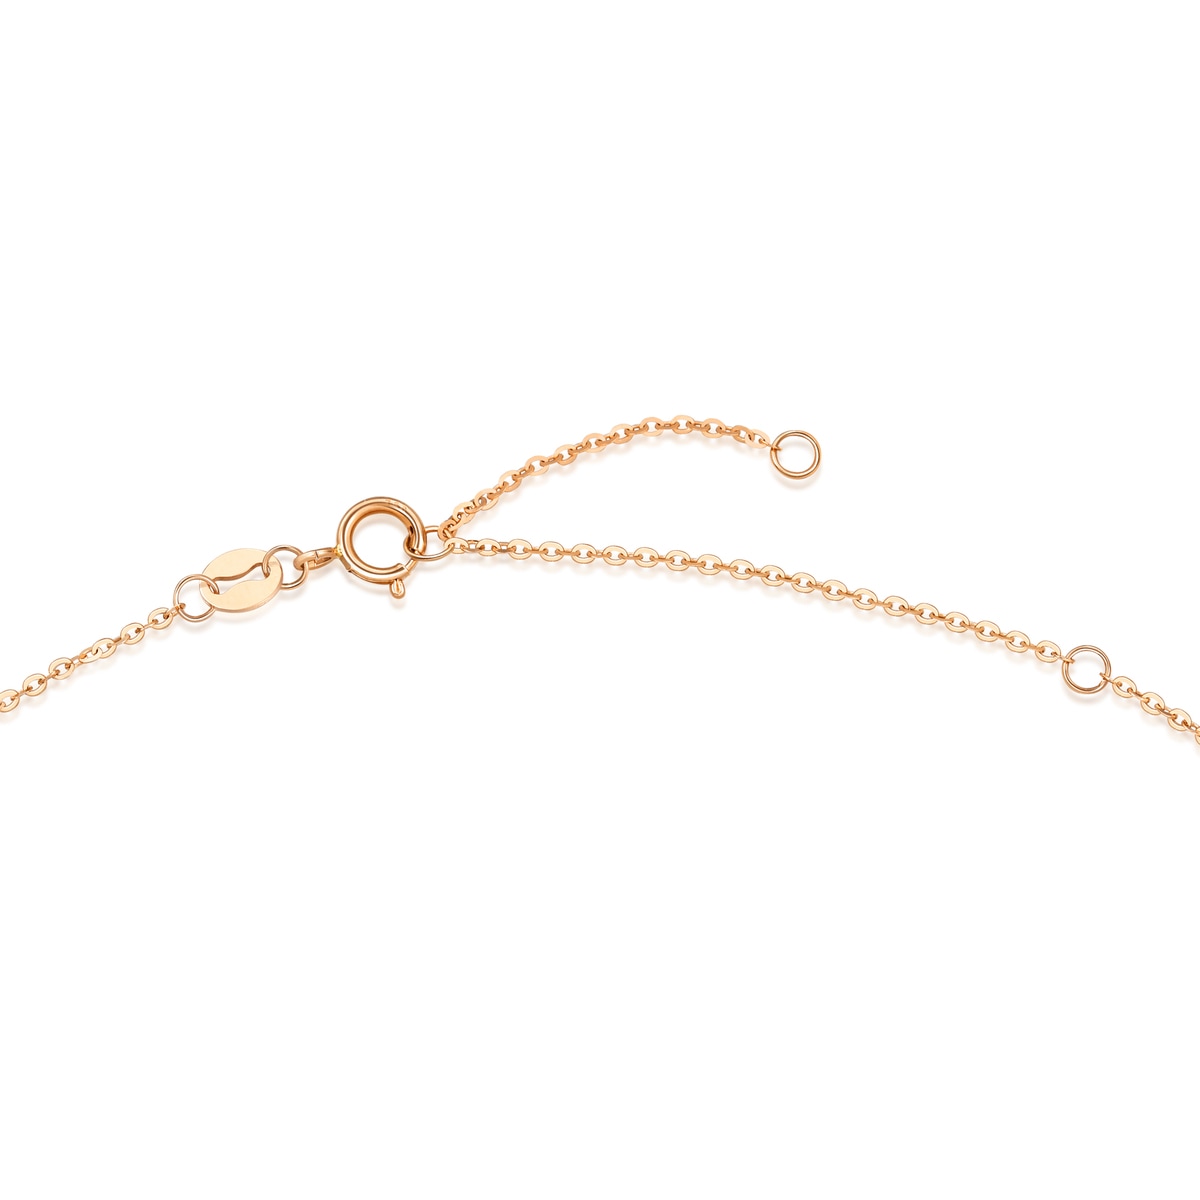 Minty Collection 18K Rose Gold Necklace - 92803N | Chow Sang Sang Jewellery